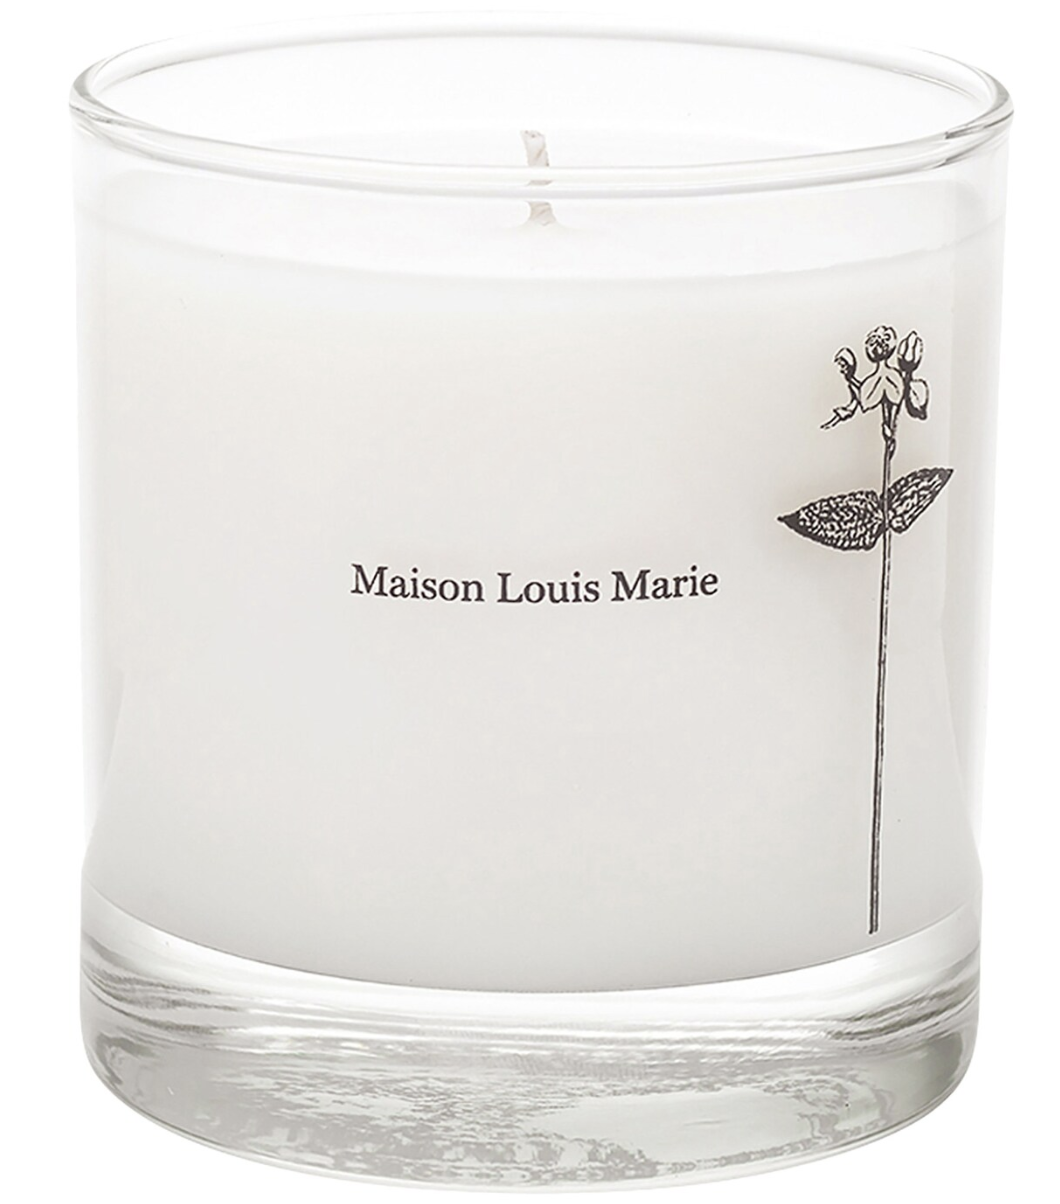 Maison Louis Marie Antidris Lavender Candle, best aromatherapy candles